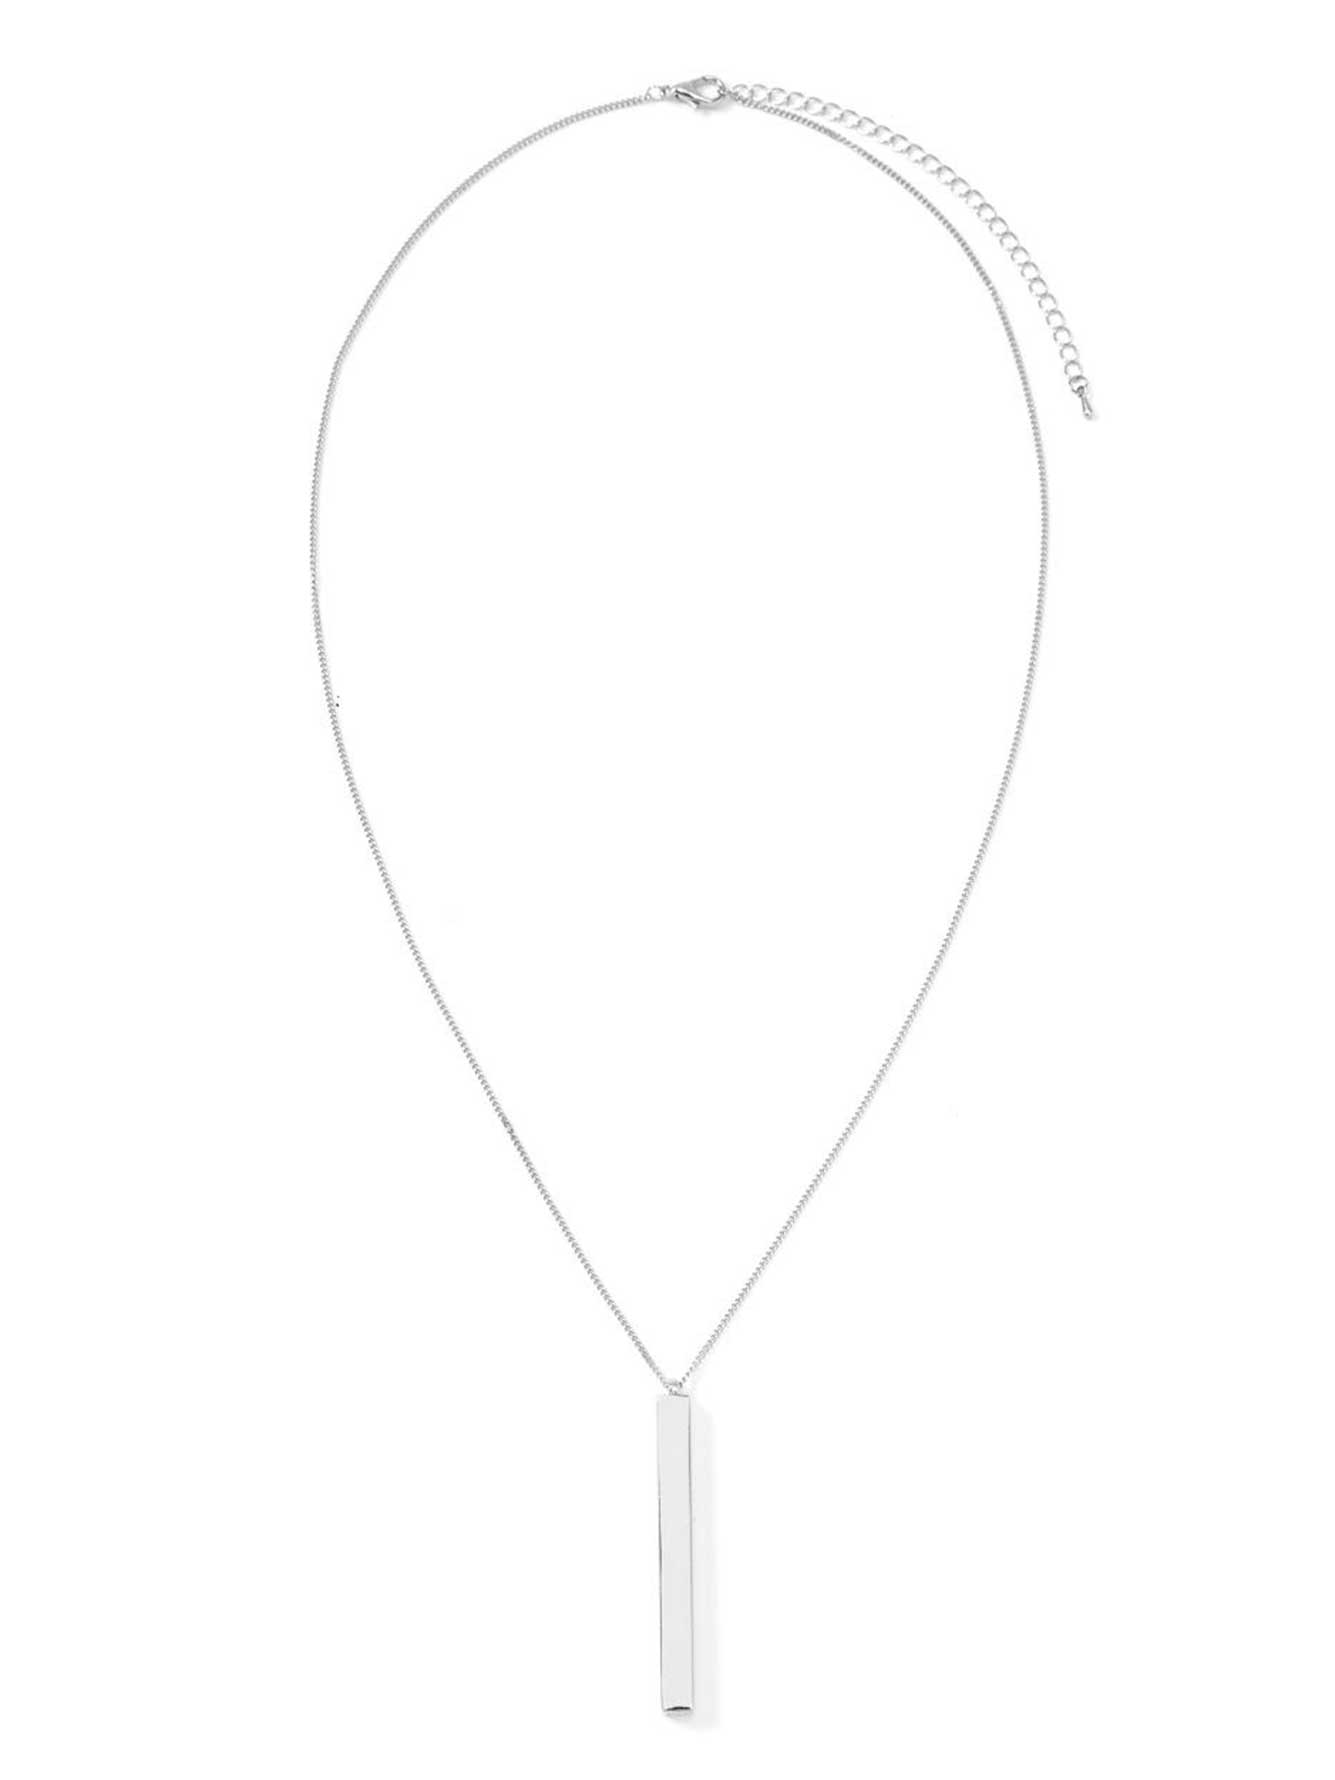 Necklace with Bar Pendant | Penningtons